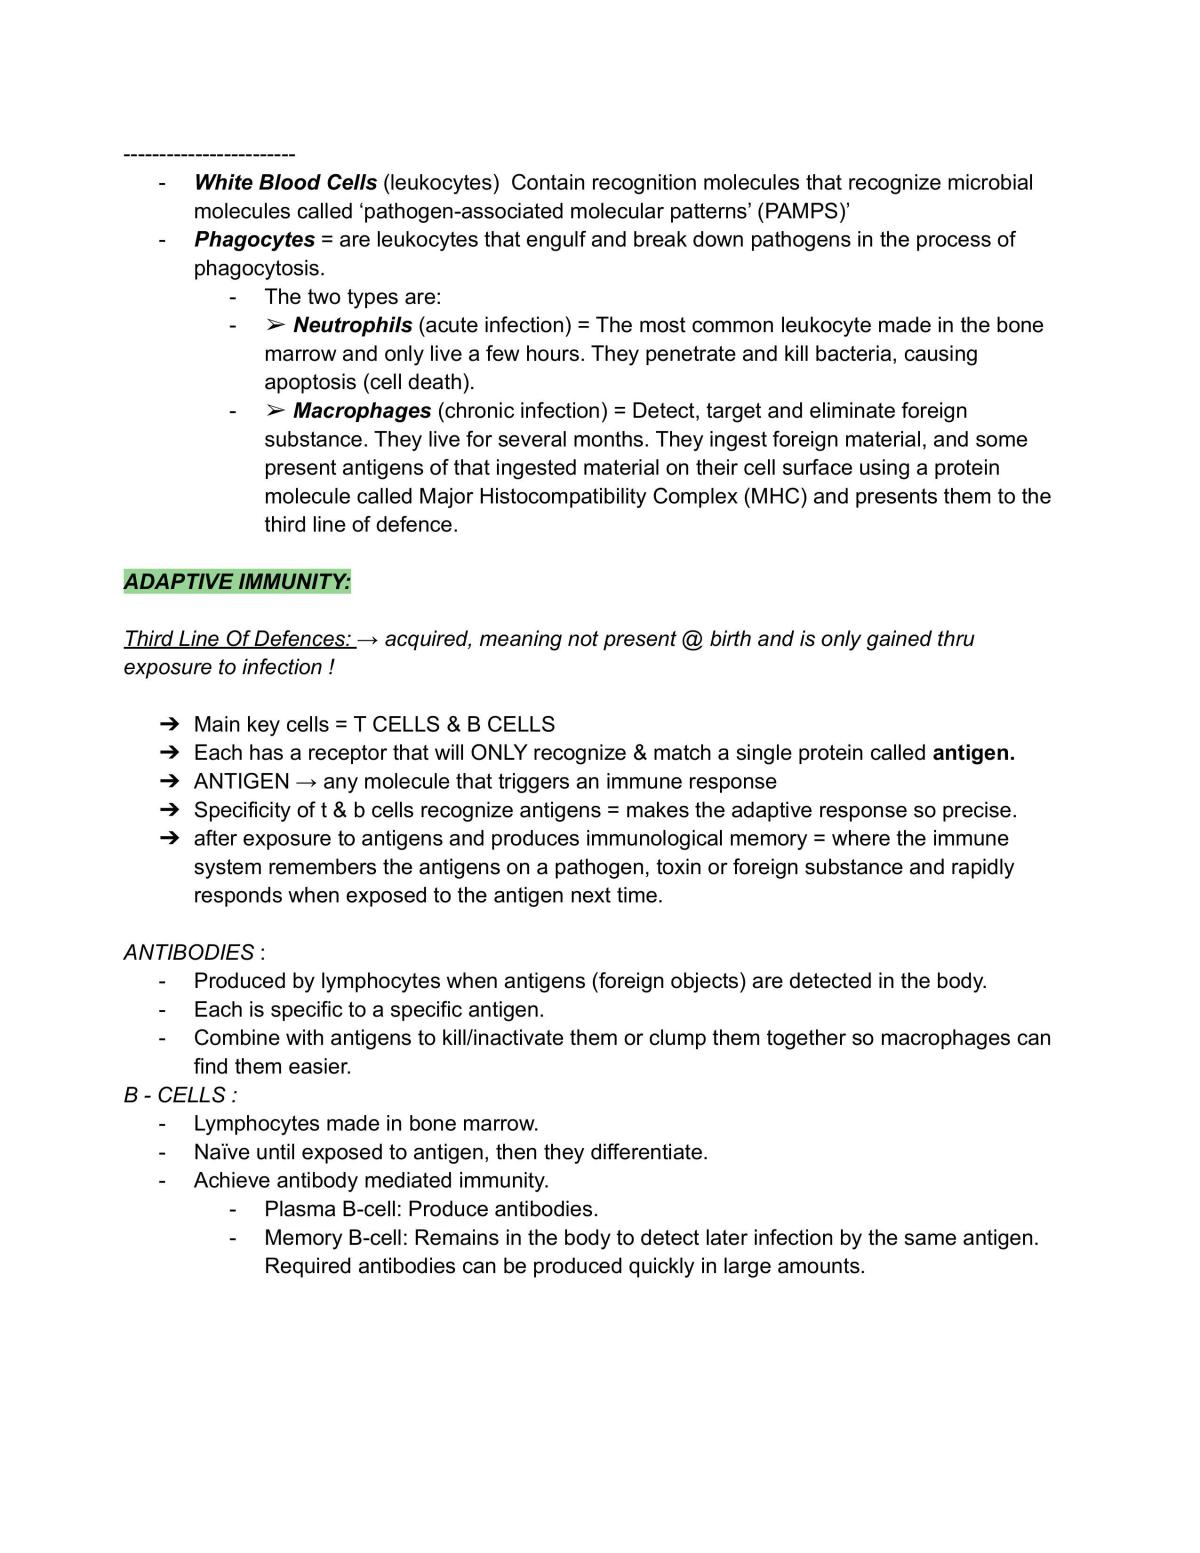 Module 7 notes - Page 18